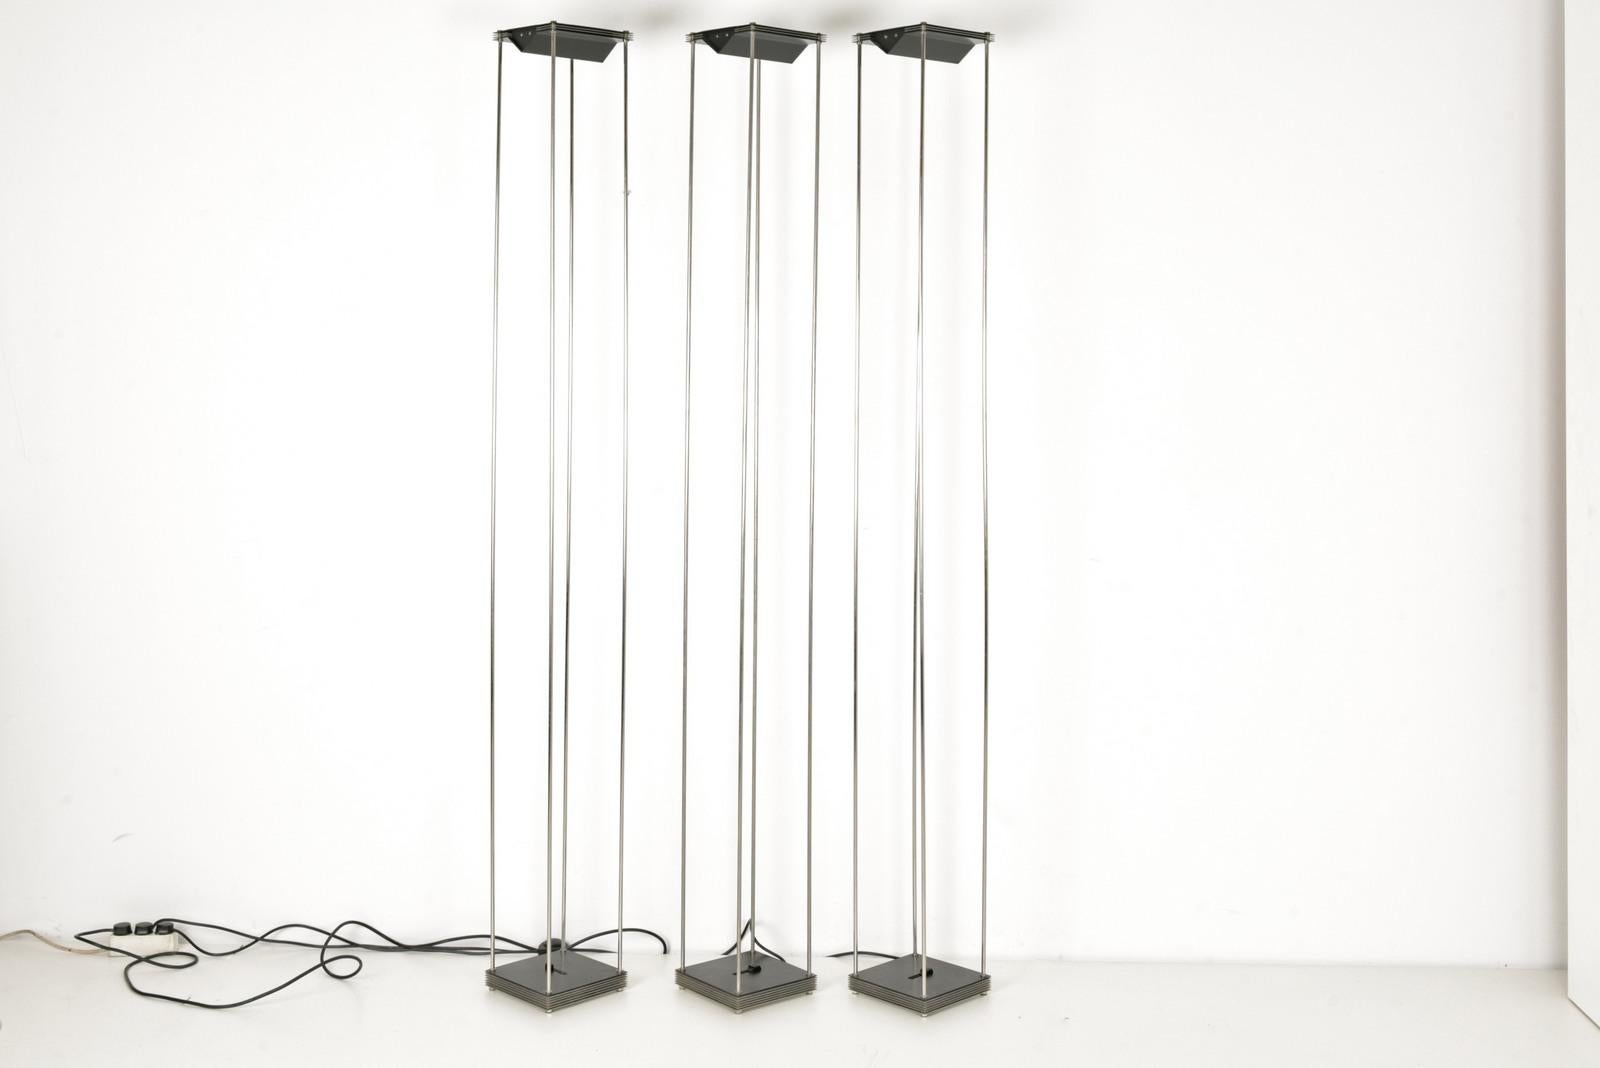 Steel 1 of 3 Floor Lamps Basis by Jean Marc da Costa for SERIEN, Germany - 1984 For Sale